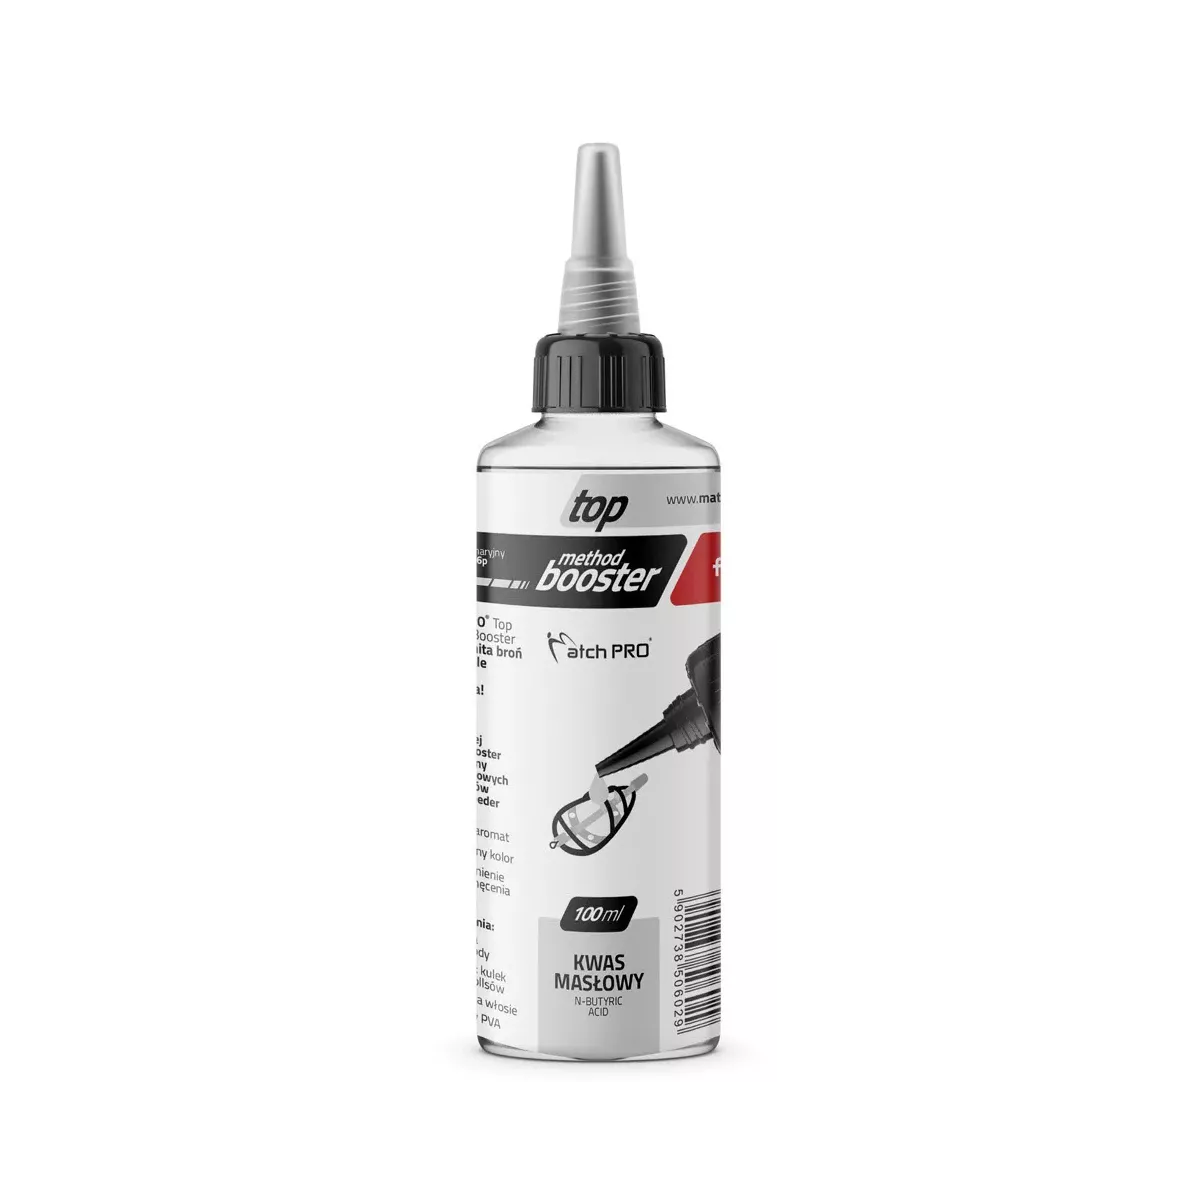 Booster MatchPro TOP Method Booster 100ml - KWAS MASŁOWY